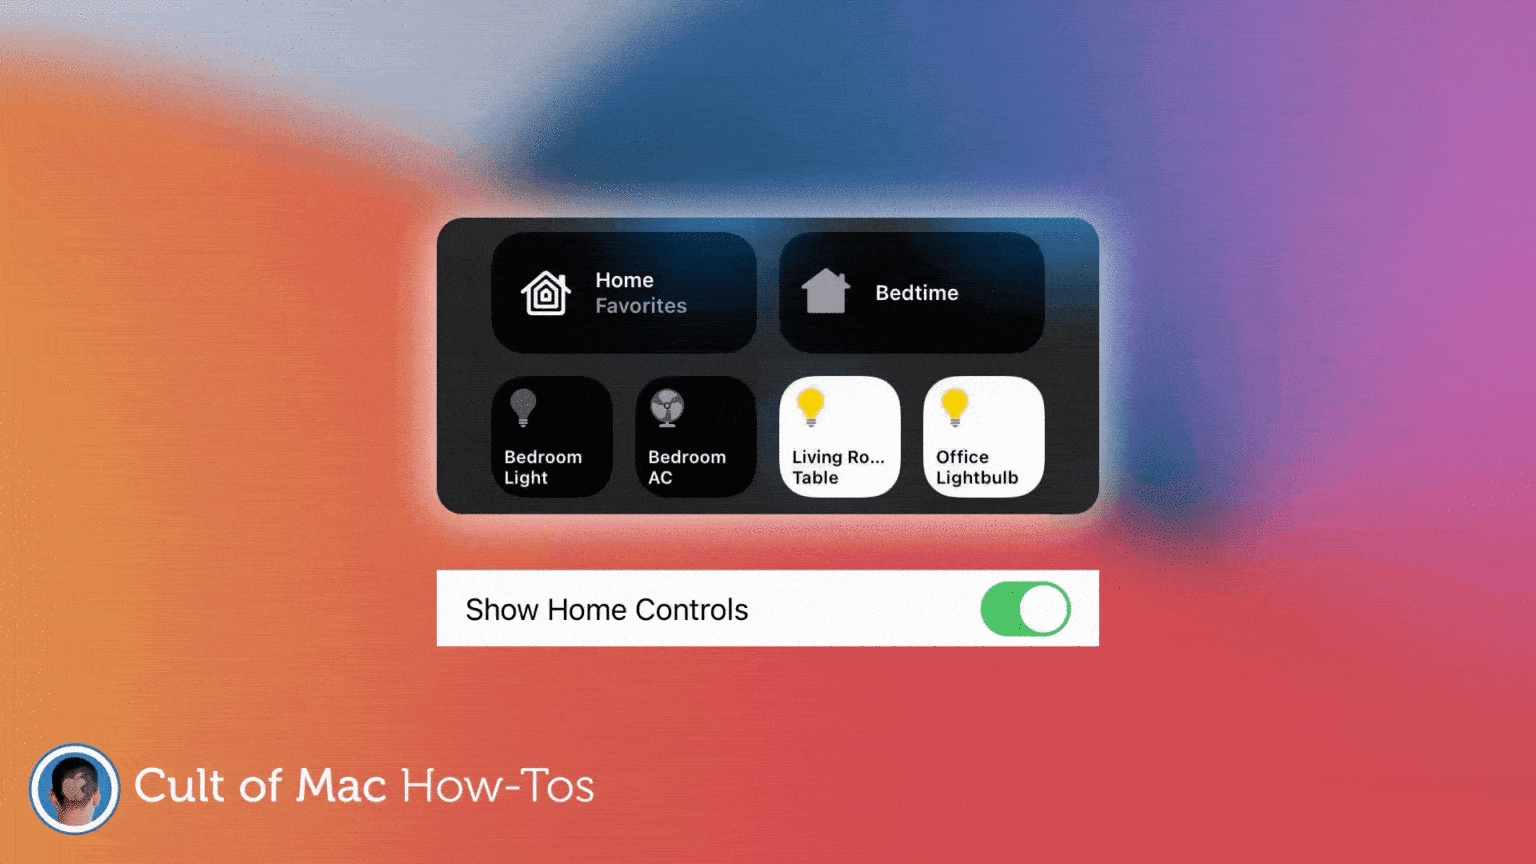 How to disable Home controls in iOS 14